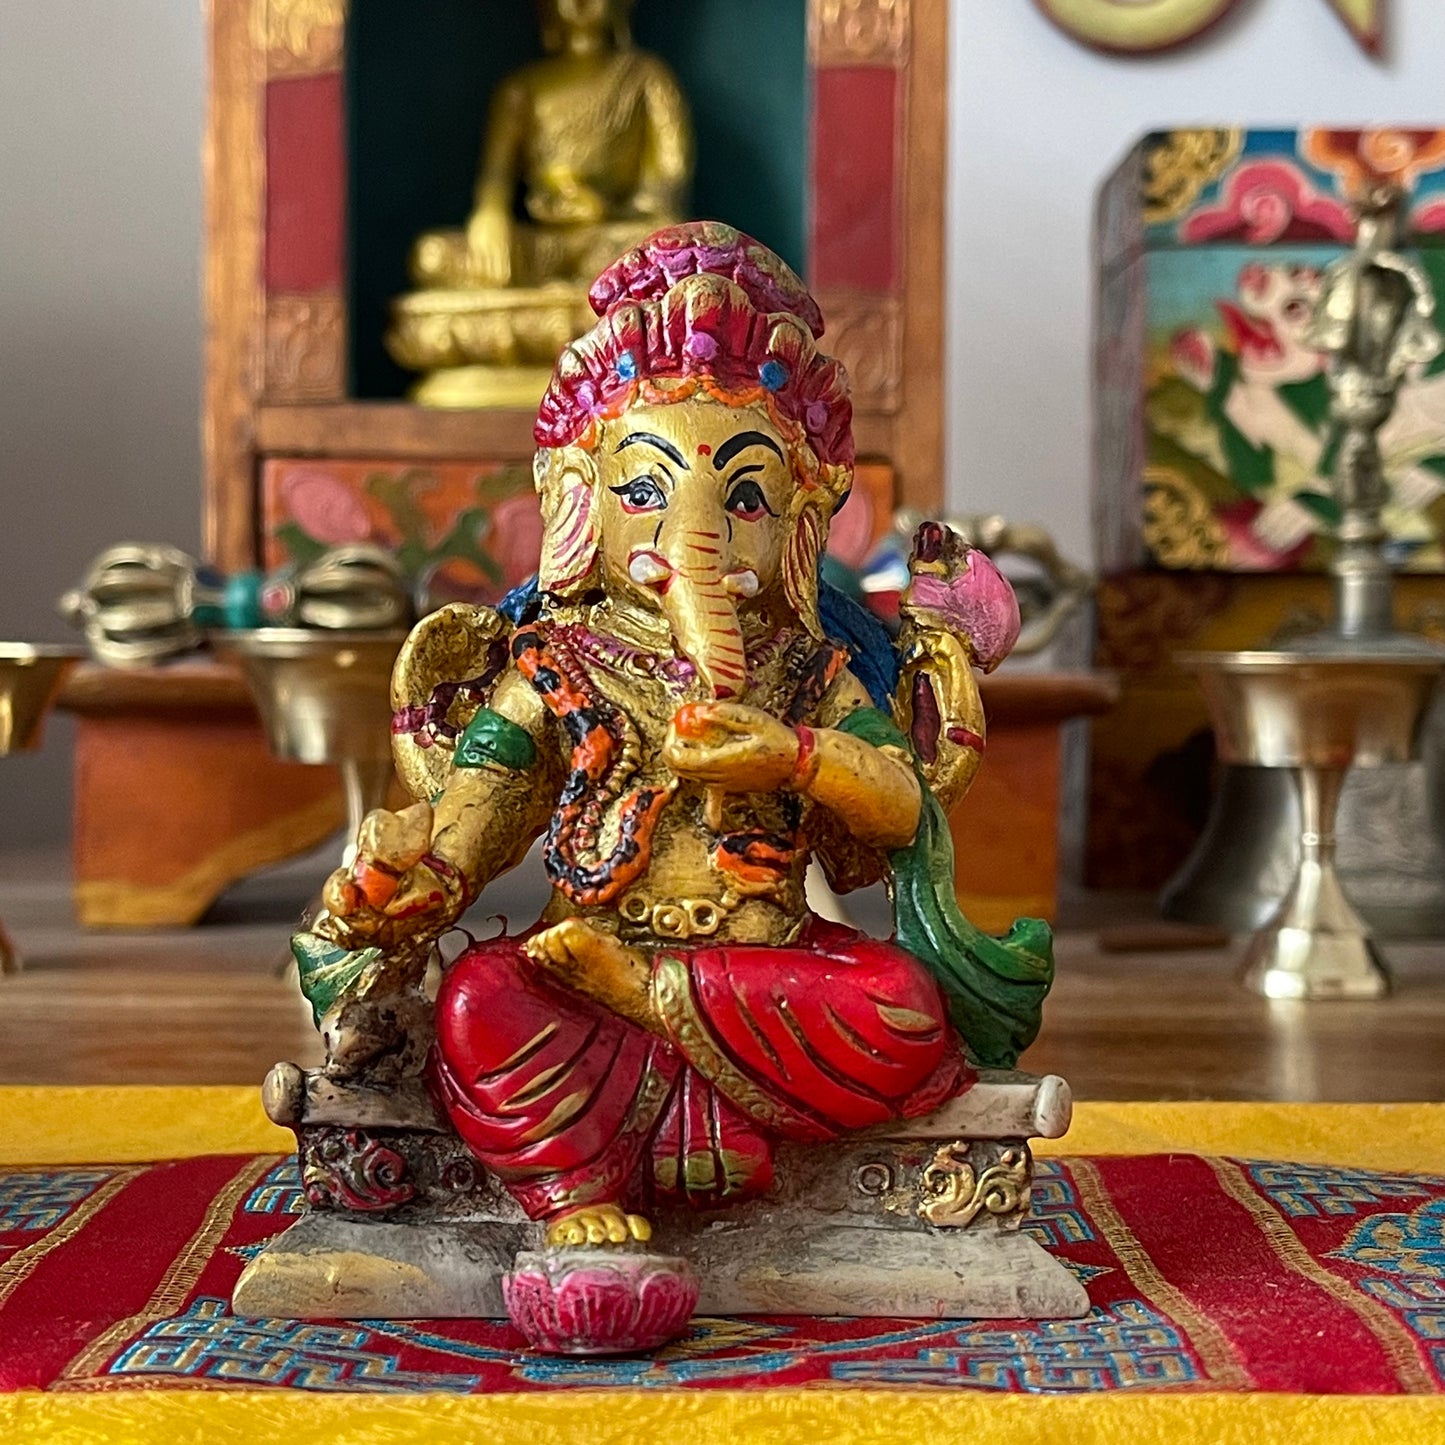 Painted Resin Ganesh 10cm Resin Statue of Ganesh Thangka Color Painted